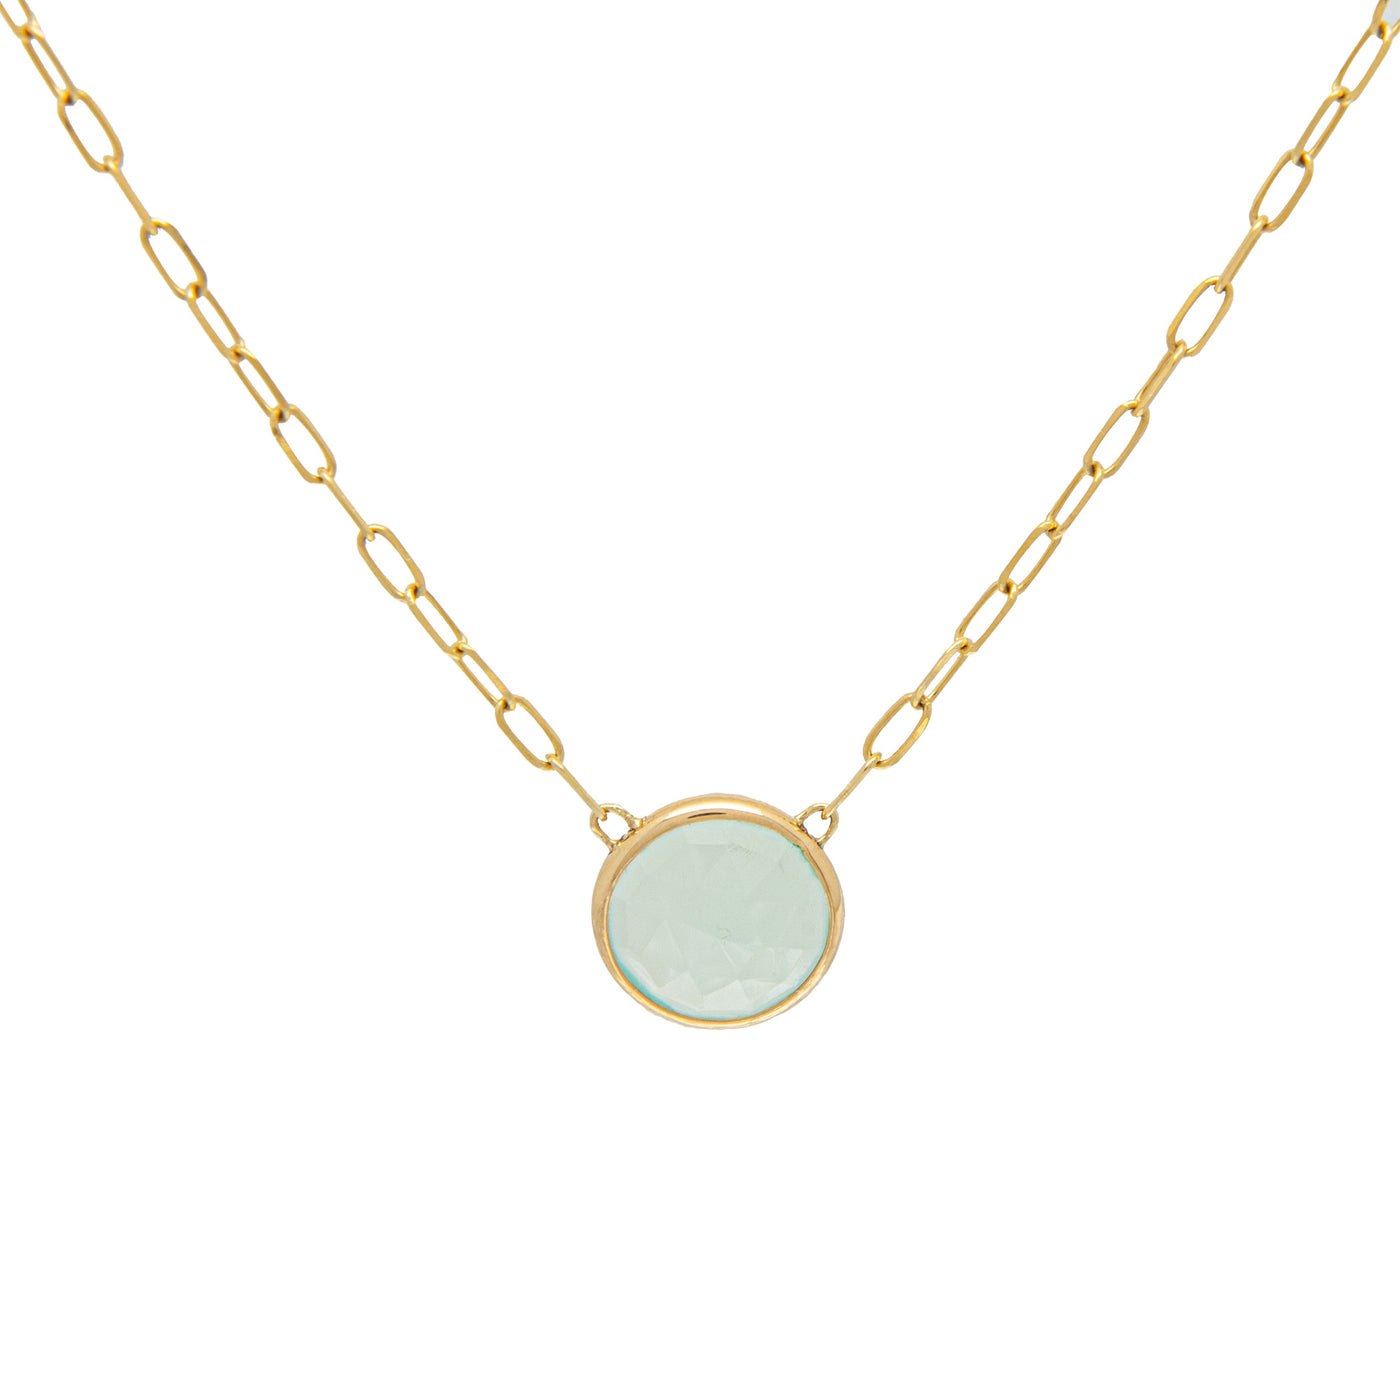 14kt YG Seafoam Chalcedony Necklace on paper clip chain